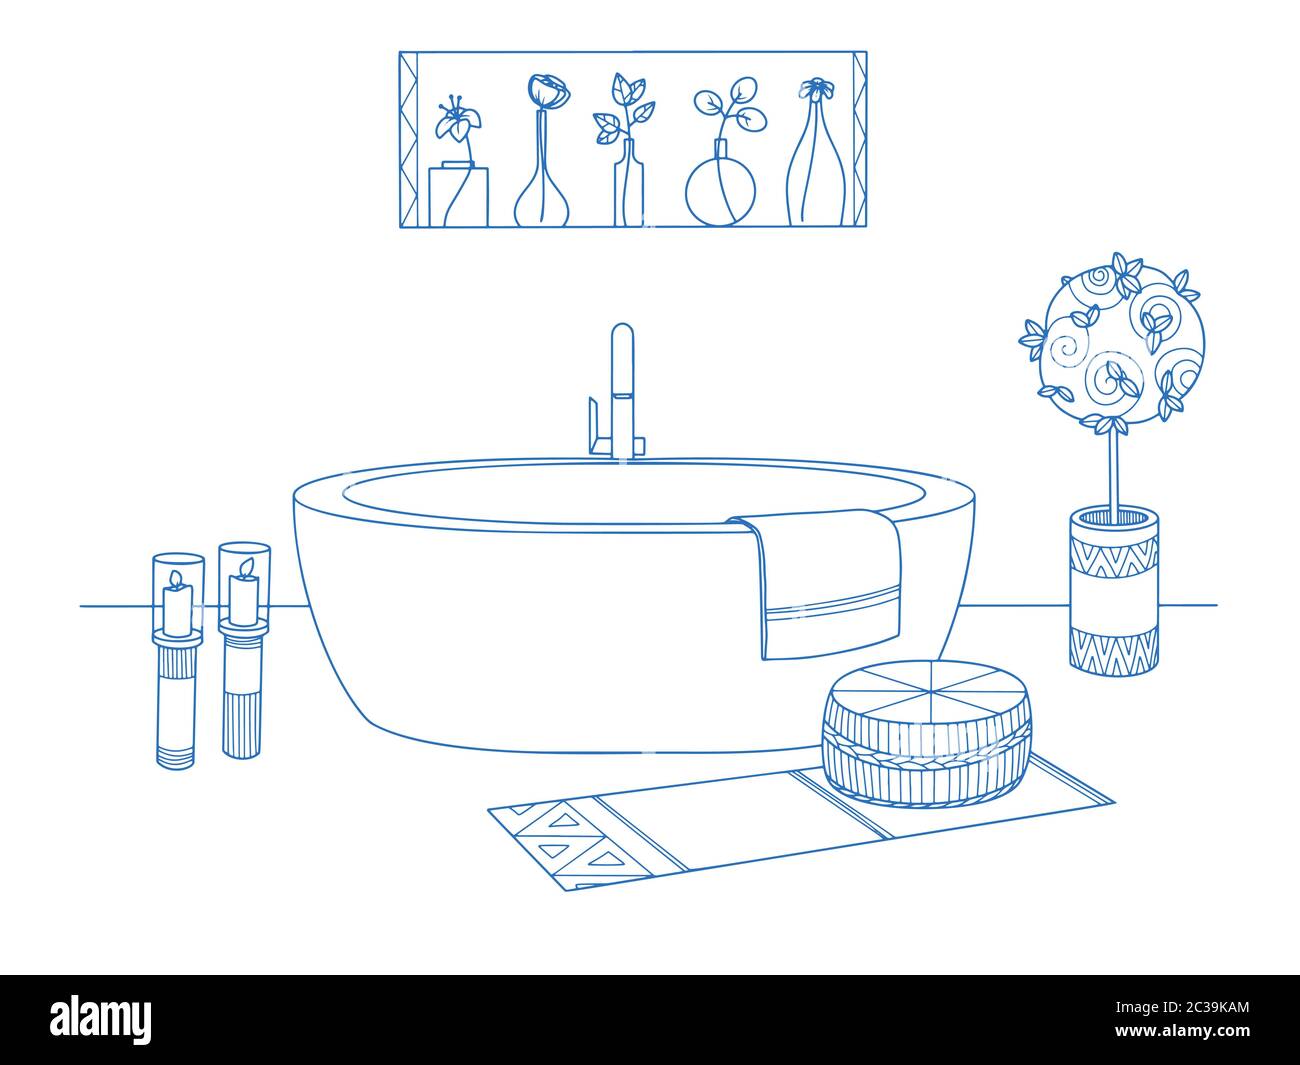 Sketches of a Old-Fashioned Bathtub | Old fashioned bathtub, Bathtub  illustration, Bathtub